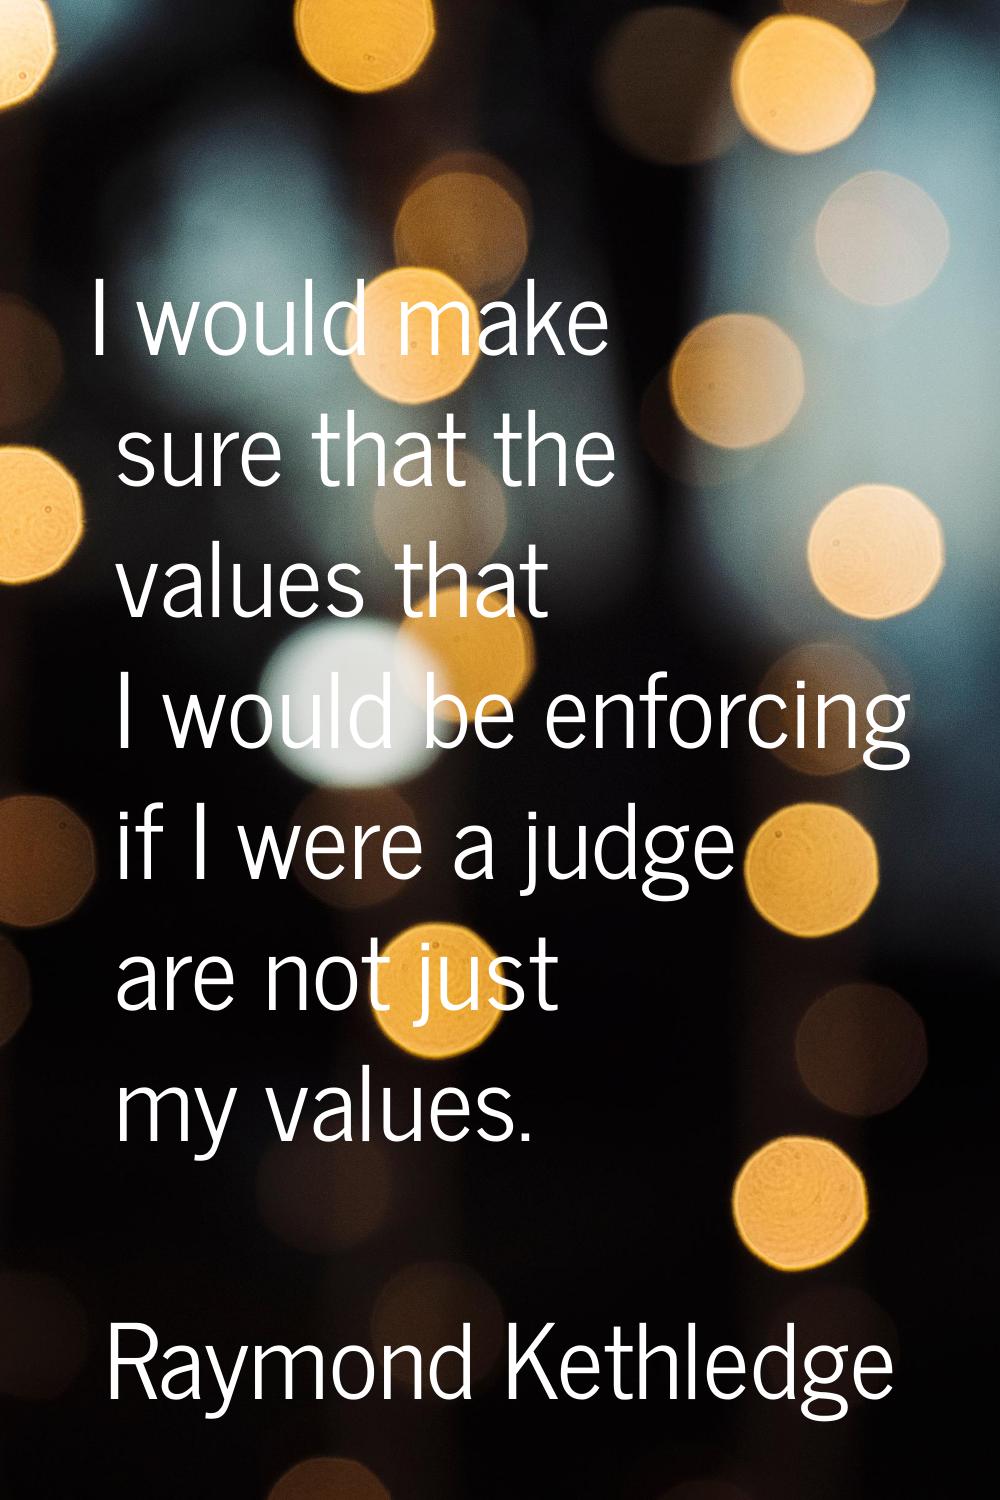 I would make sure that the values that I would be enforcing if I were a judge are not just my value